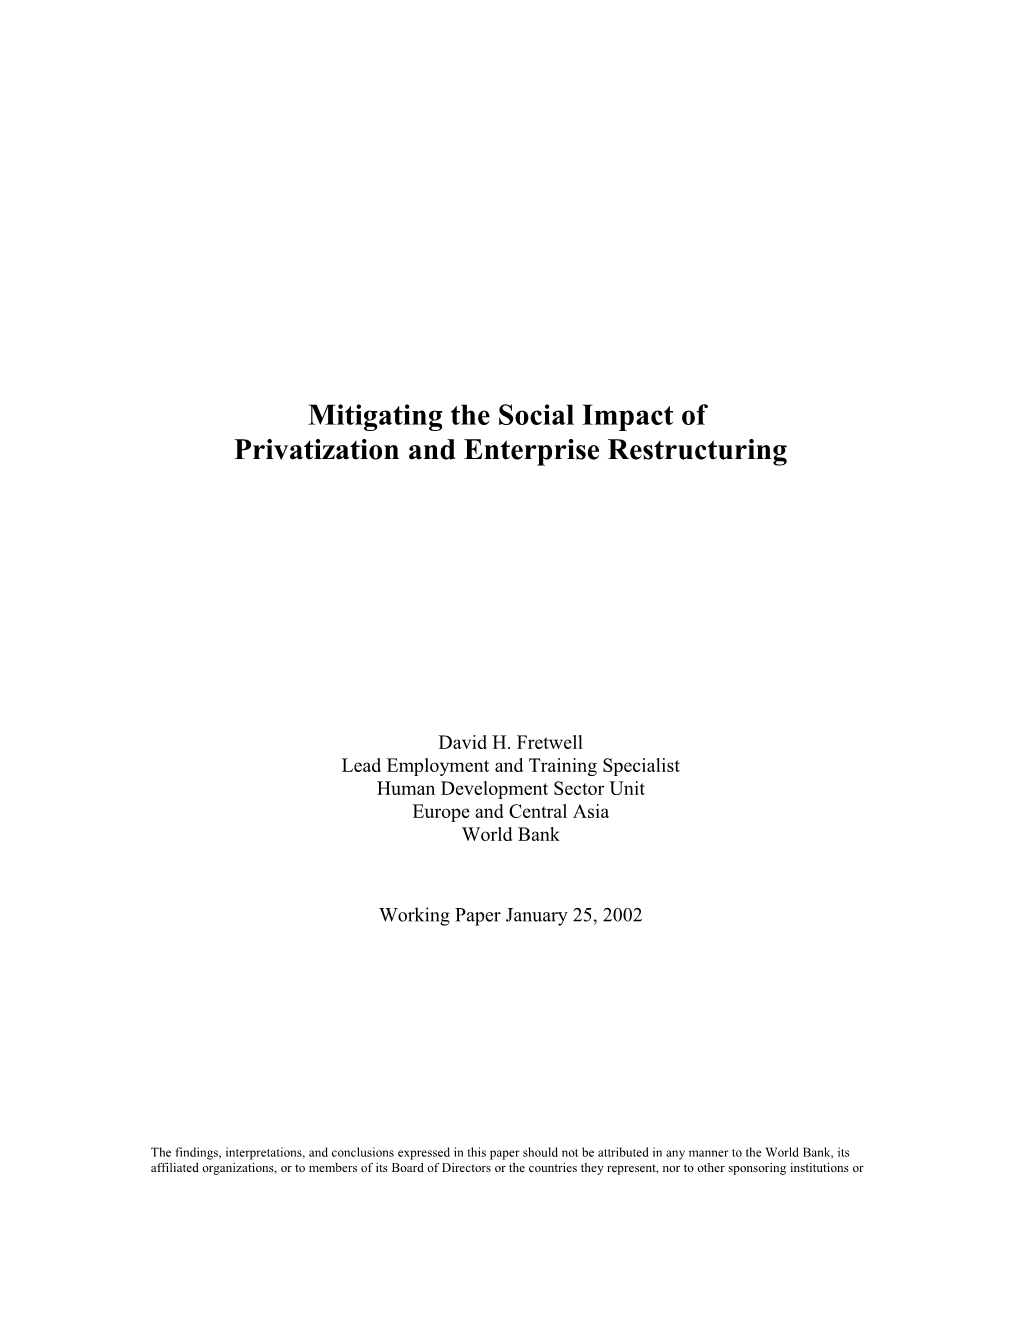 Mitigating the Social Impact of Privatization and Enterprise Restructuring